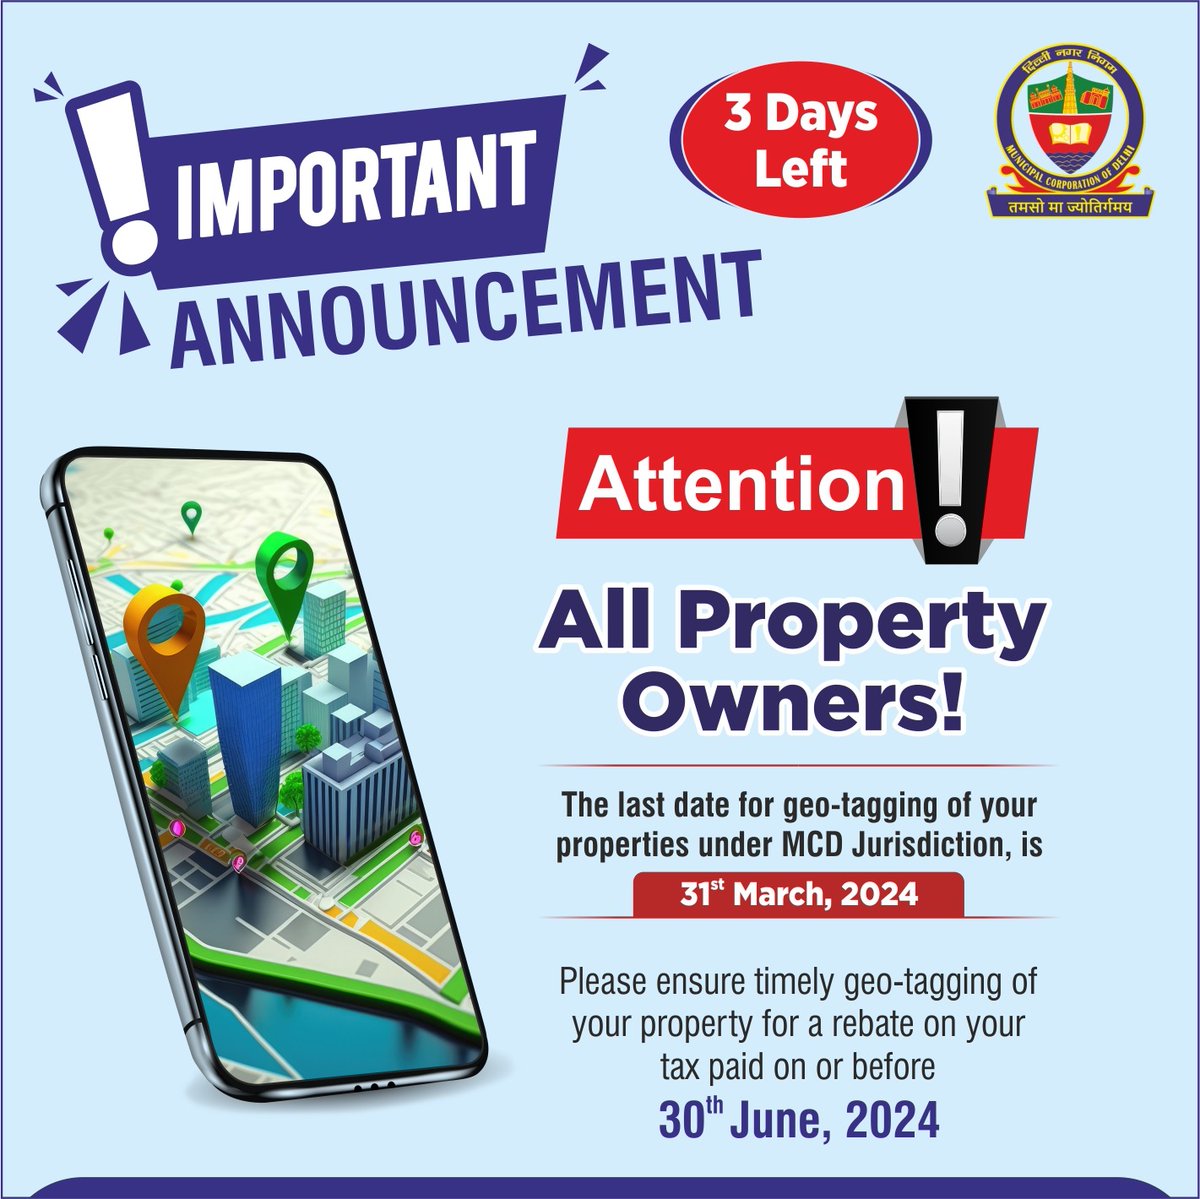 Dear Residents & Property Owners 📢 Have you completed the Geo-Tagging process for your property? It’s essential to avail 10% rebate on your property tax paid on or before 30th June. Hurry! Last date is 31st March, 2024. @LtGovDelhi @OberoiShelly @GyaneshBharti1